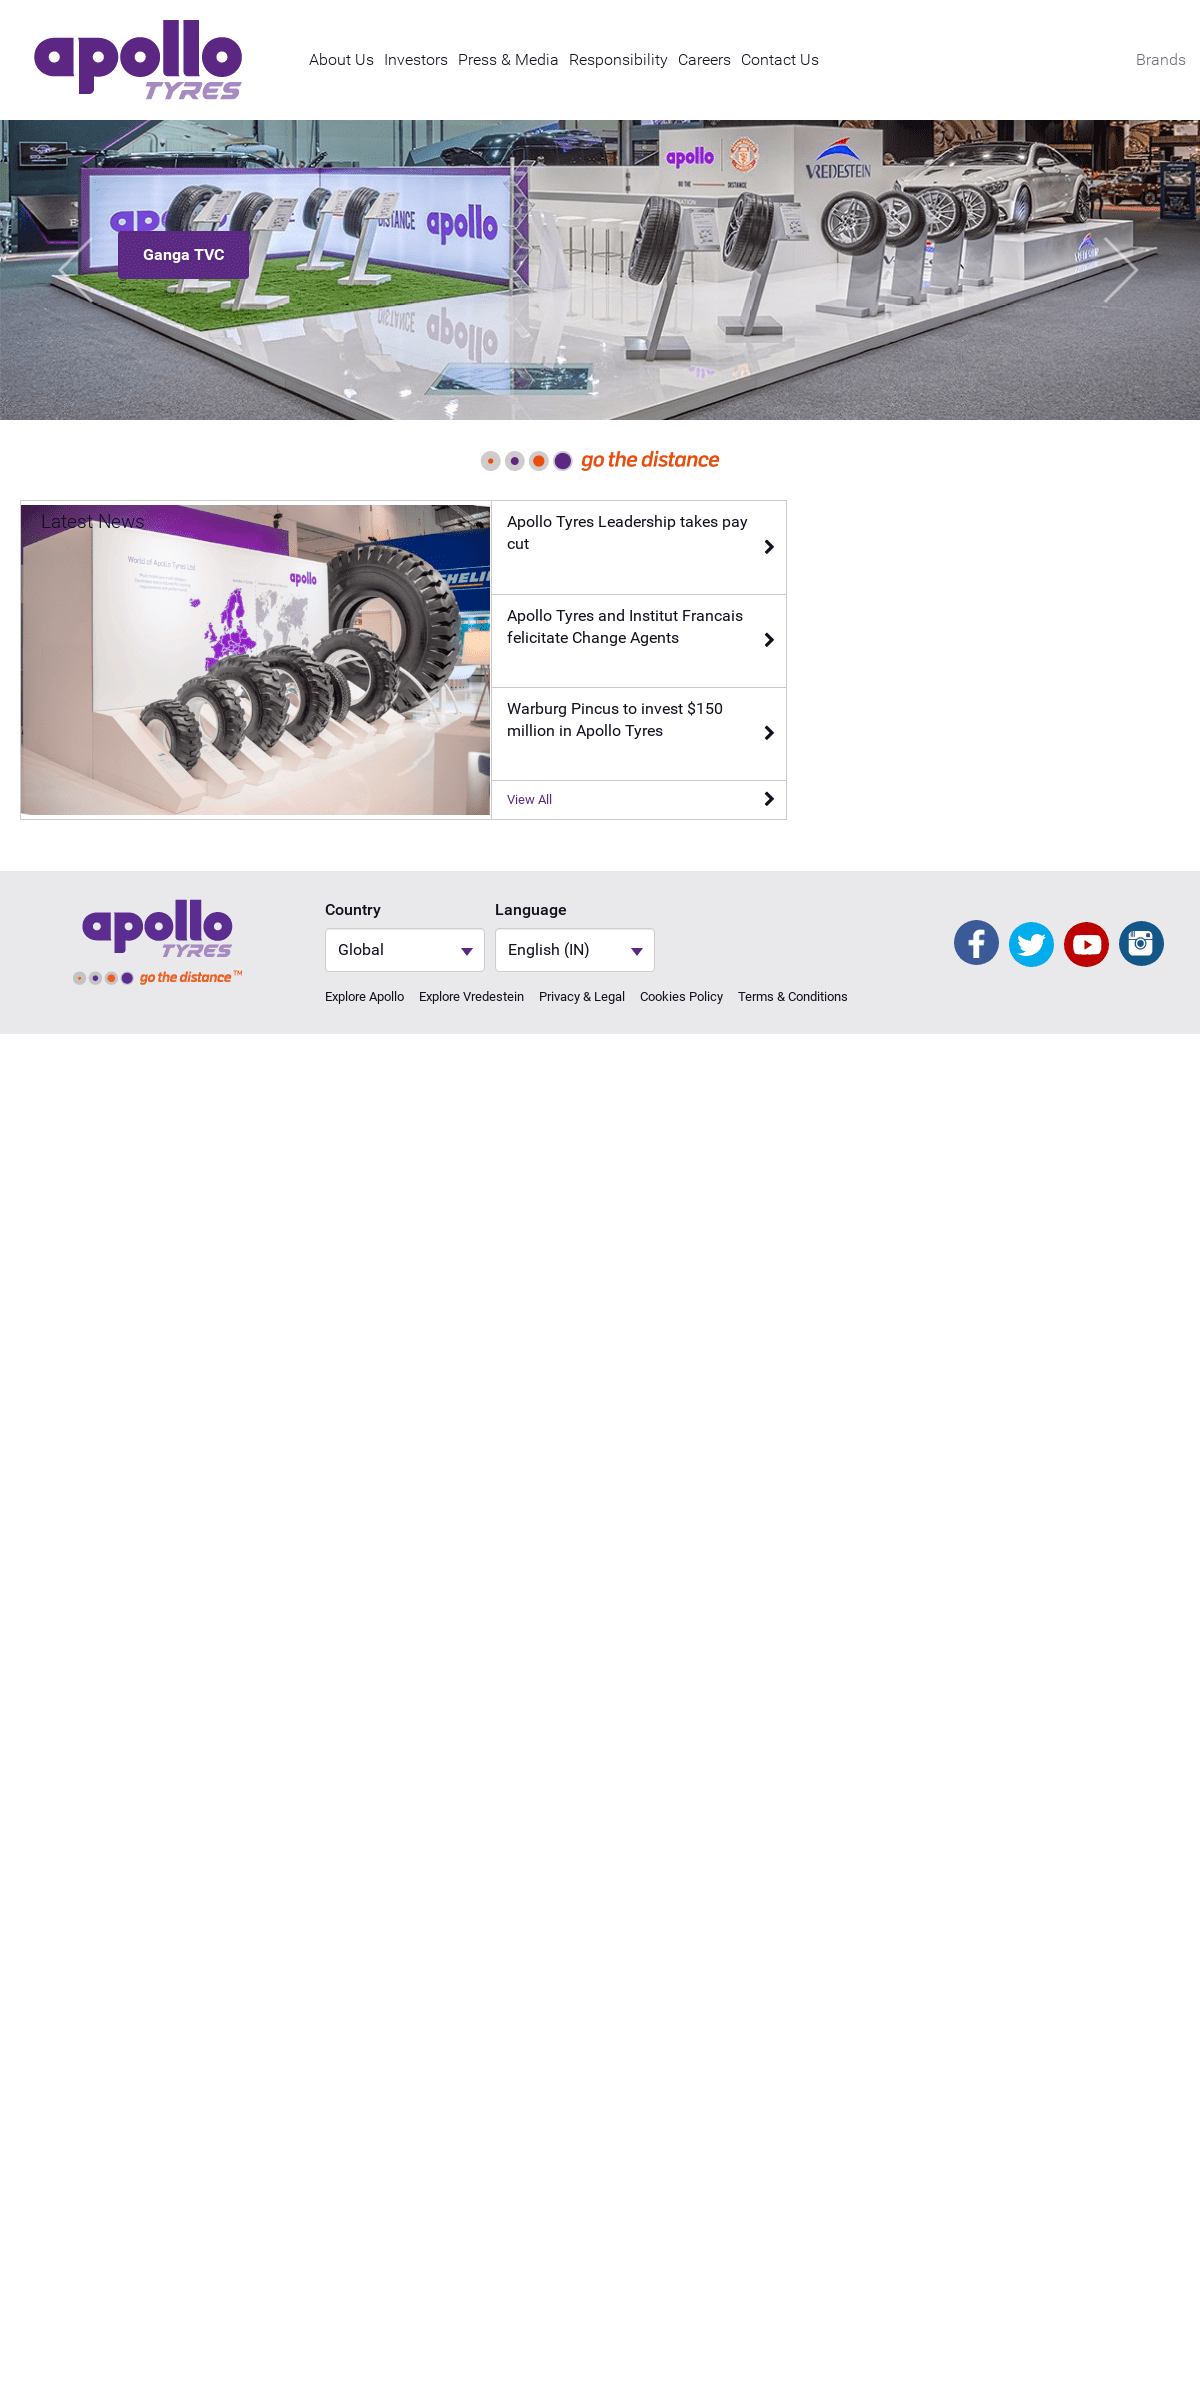 A complete backup of apollotyres.com